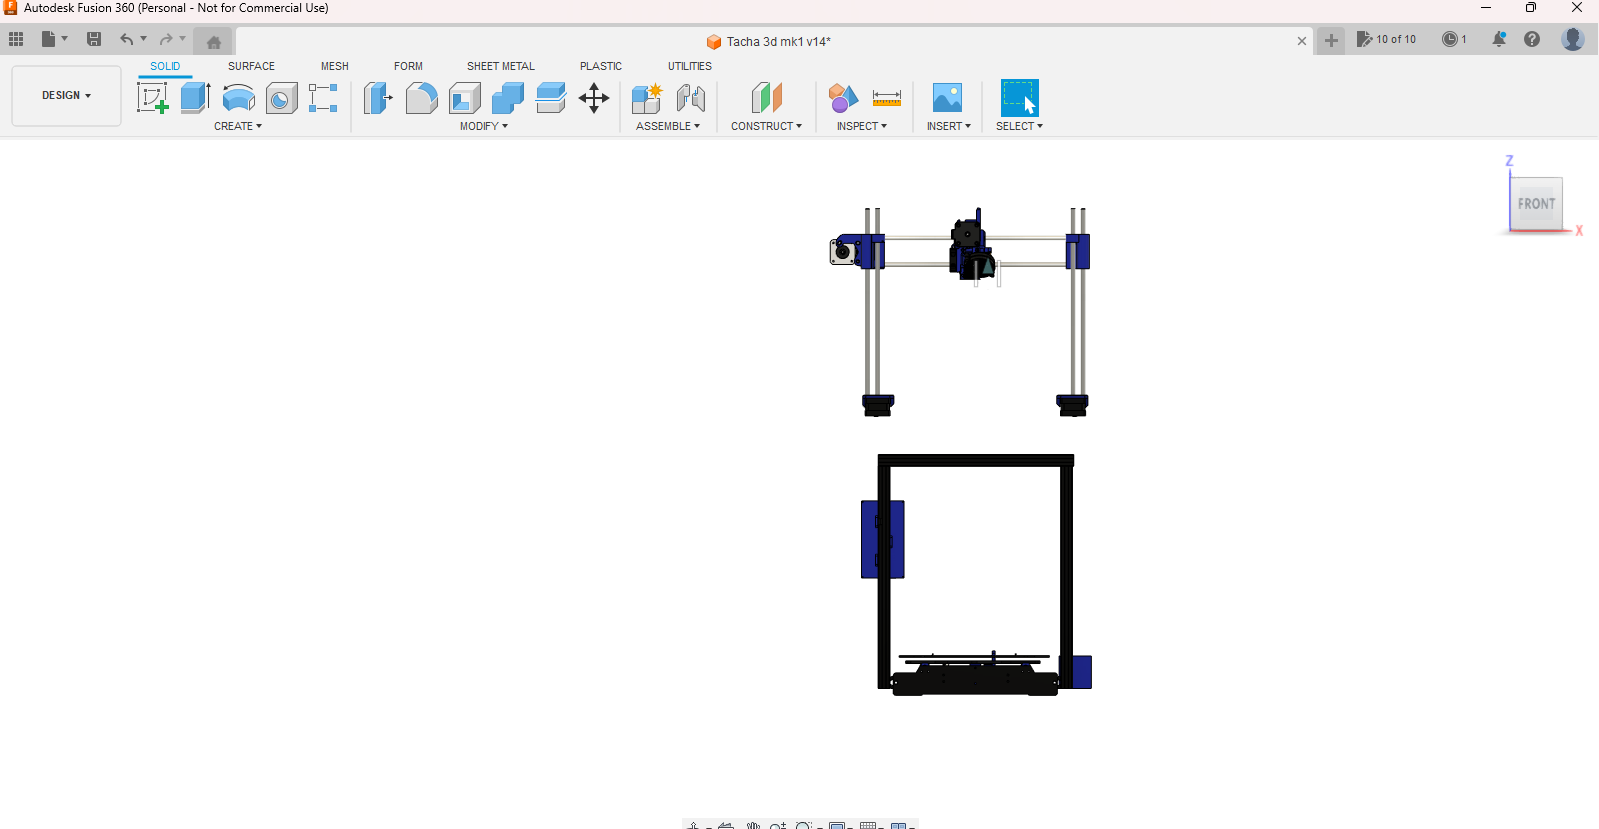 Autodesk Fusion 360 (Personal - Not for Commercial Use) 6_30_2023 9_37_20 PM.png